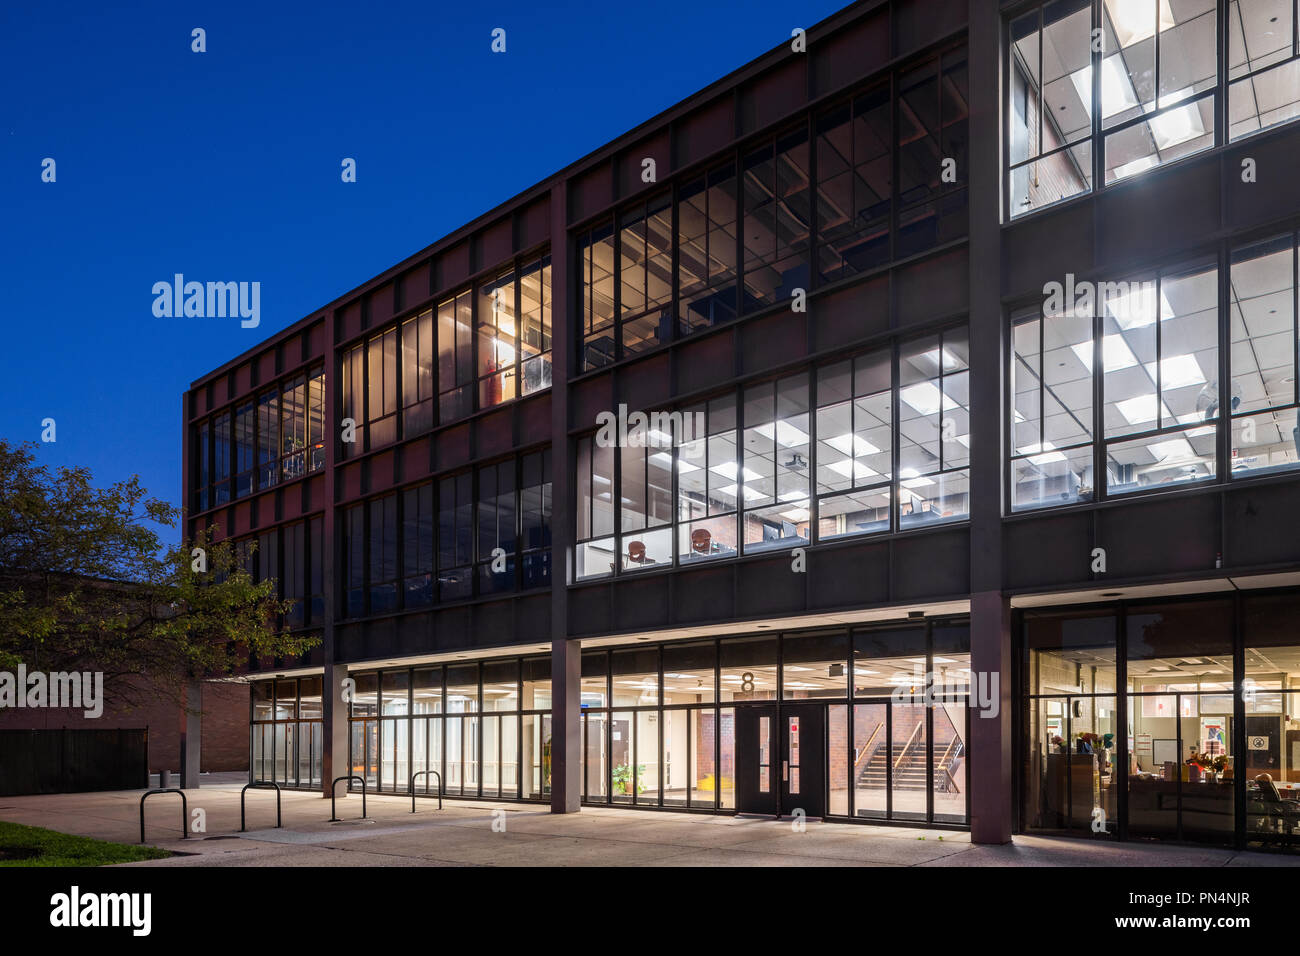 Dusk exterior of Whitney M. Young Magnet High School Stock Photo - Alamy